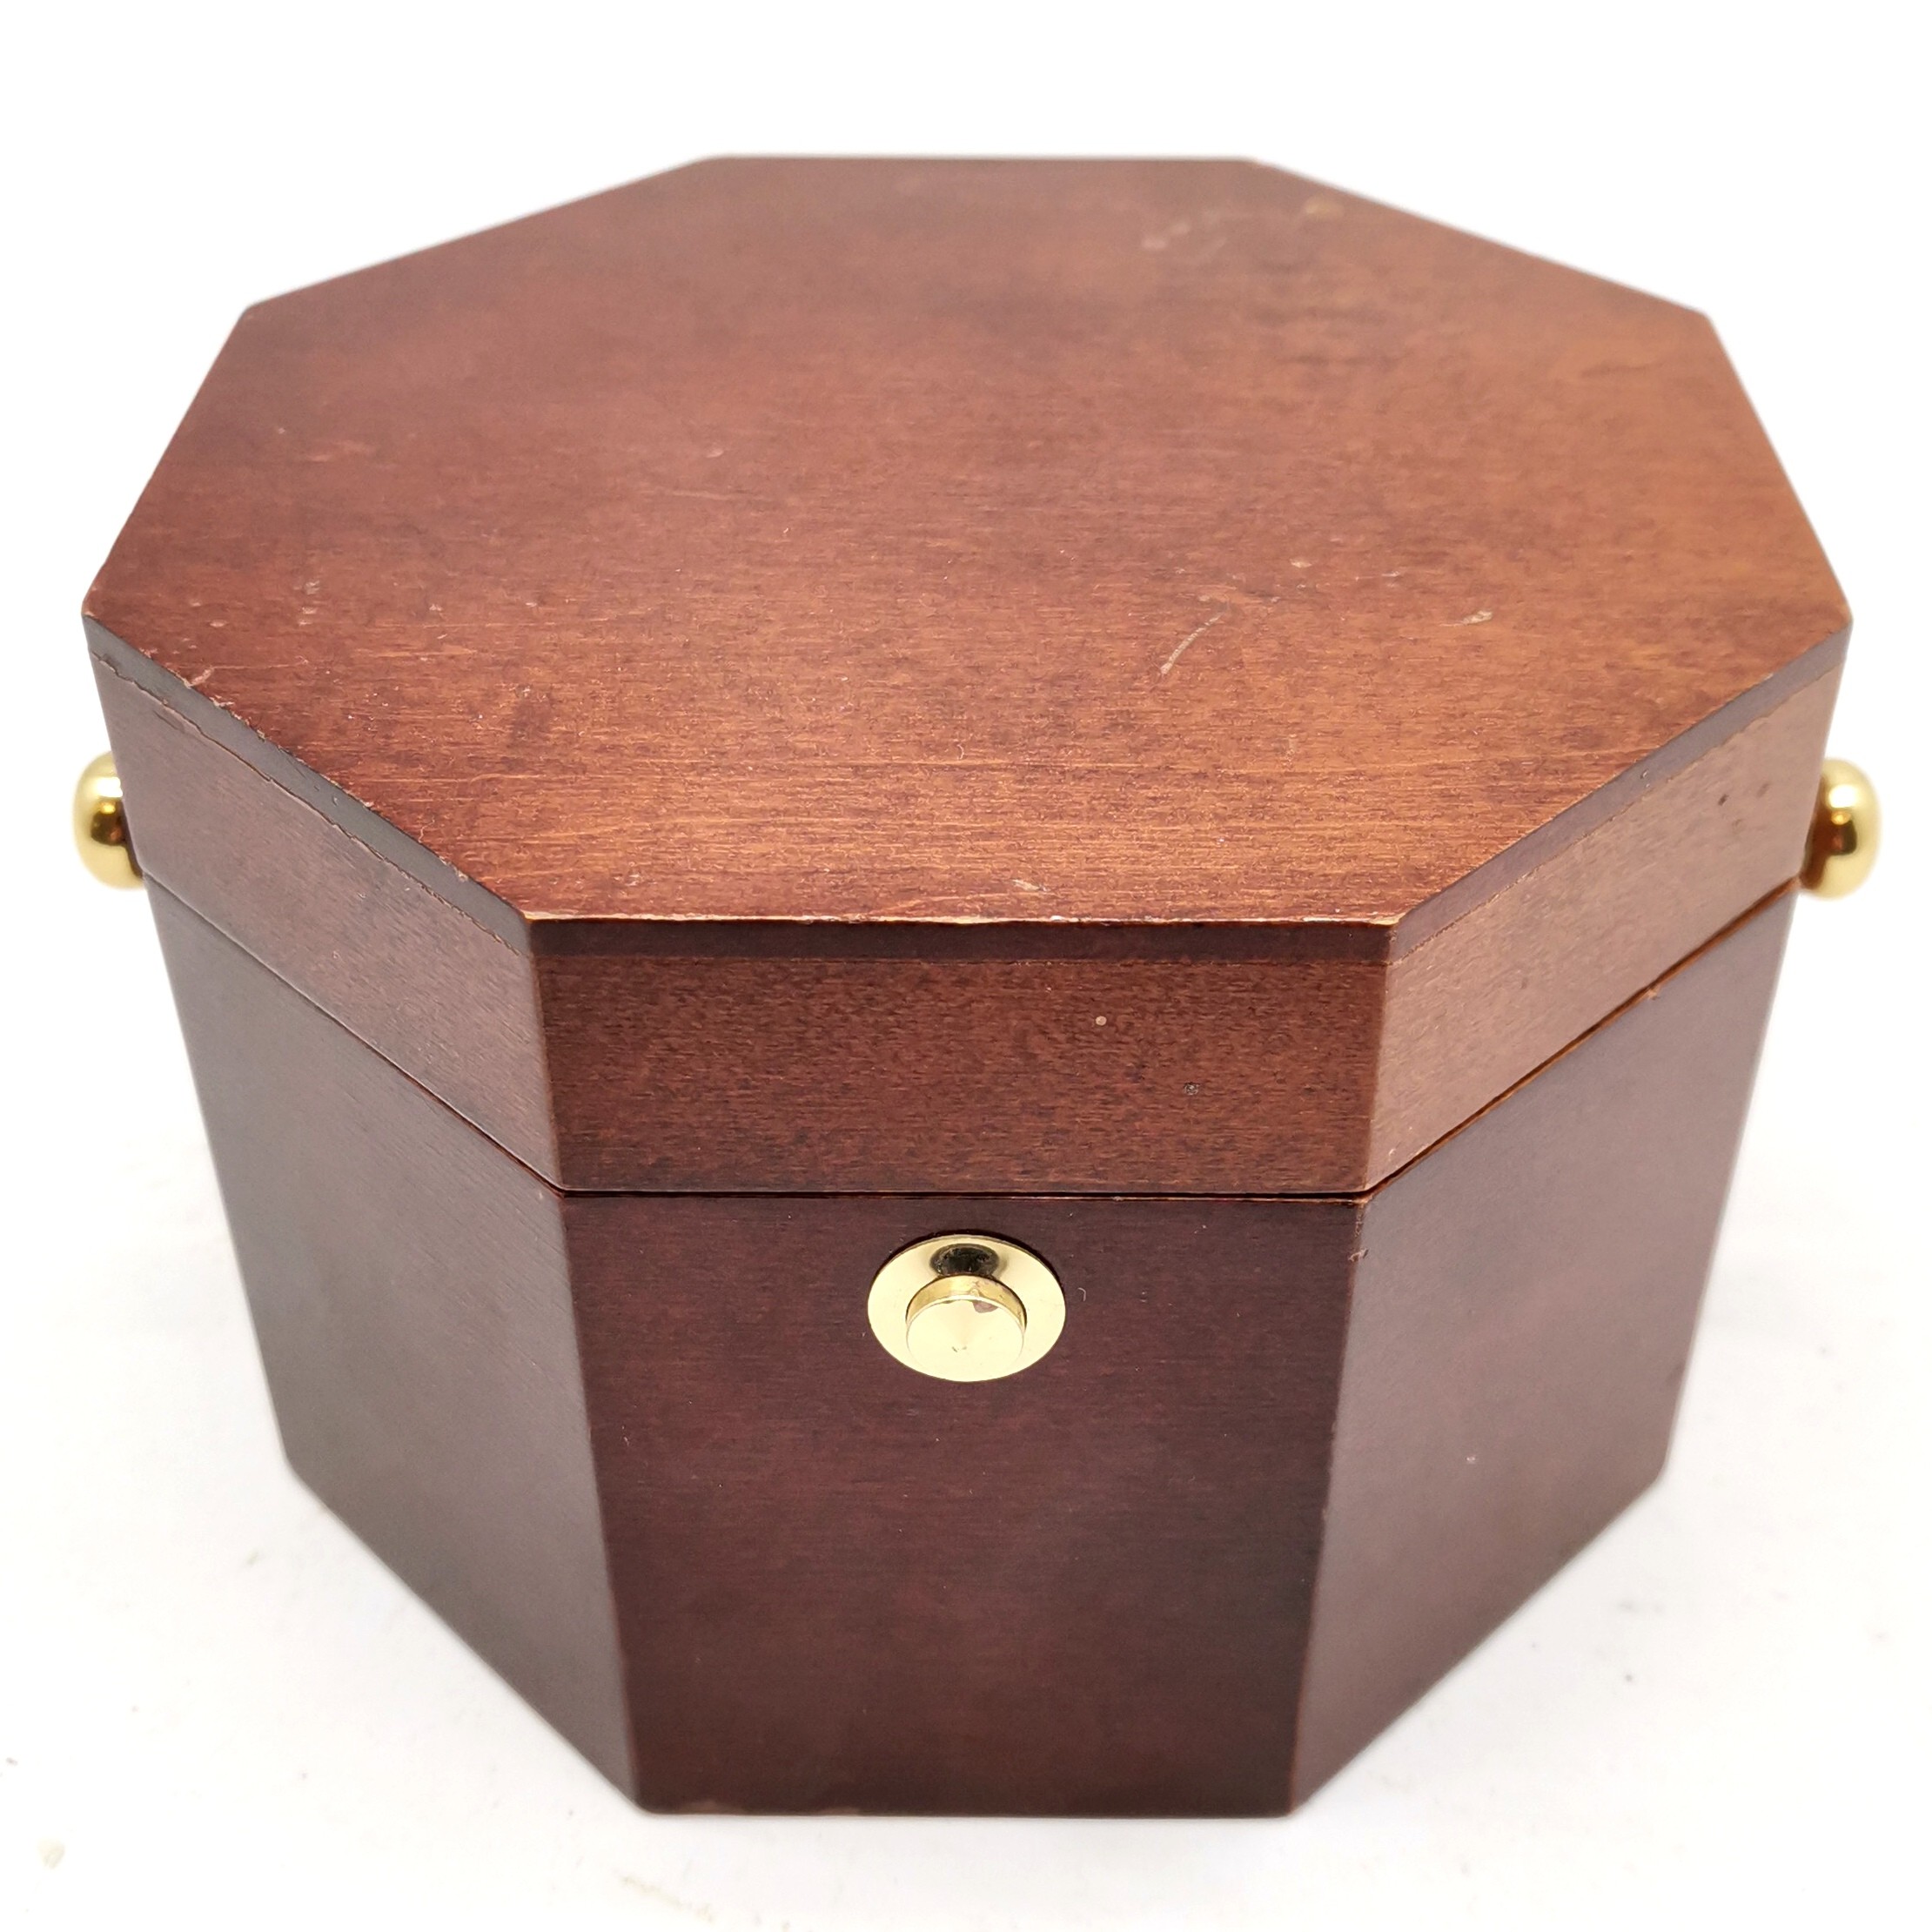 Howard Miller quartz clock in an octagonal wooden box - 14.5cm x 14.5cm x 10.5cm & in used condition - Image 2 of 5